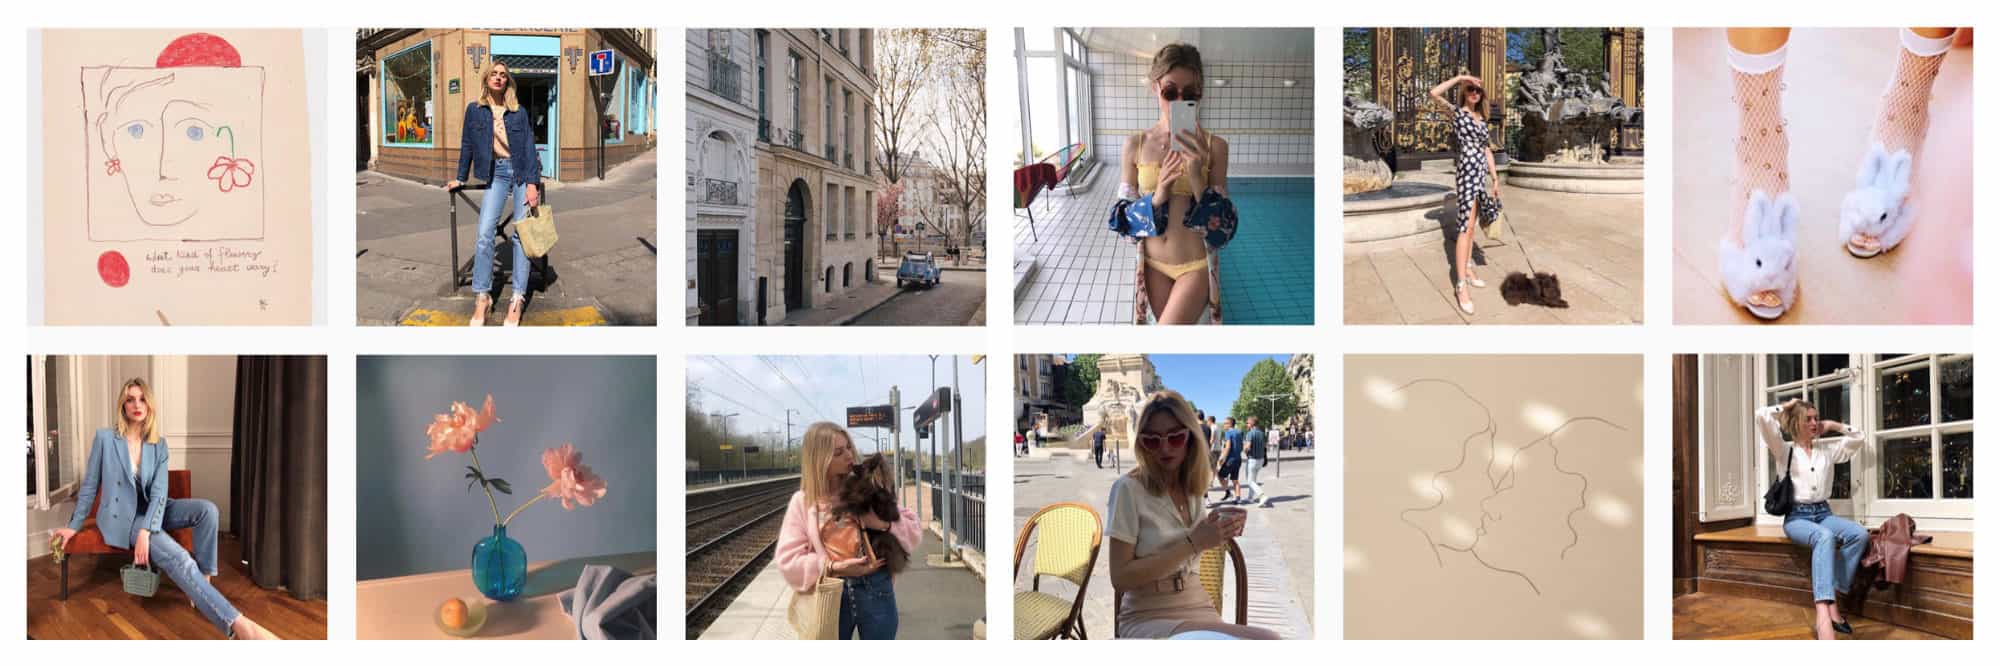 A selection of images of French Instagram fashion influencer Lucie Mahé.